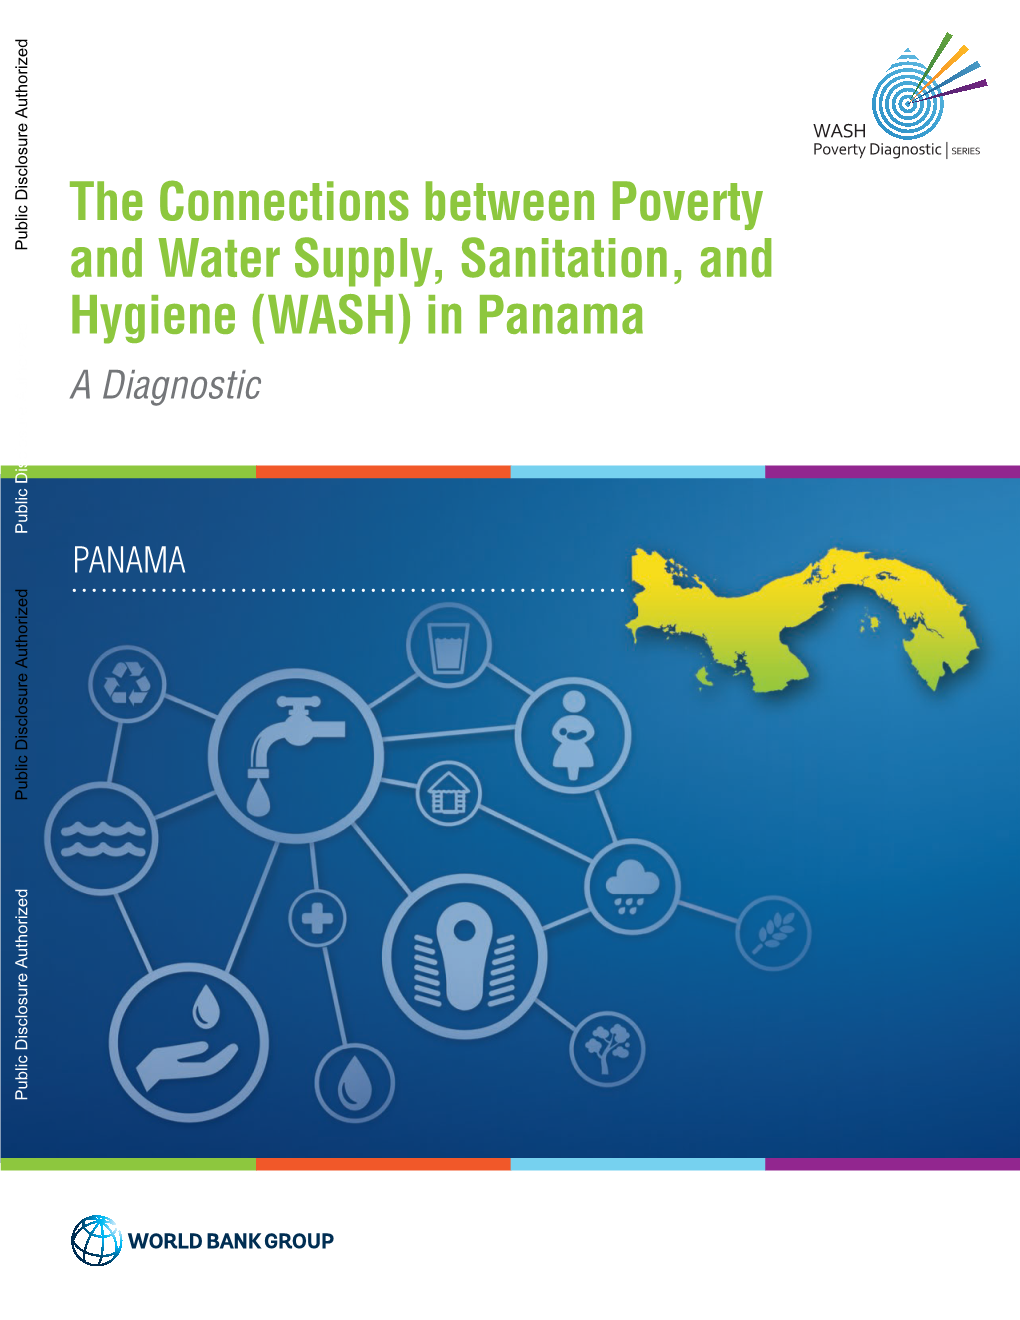 The Connections Between Poverty and Water Supply, Sanitation, And